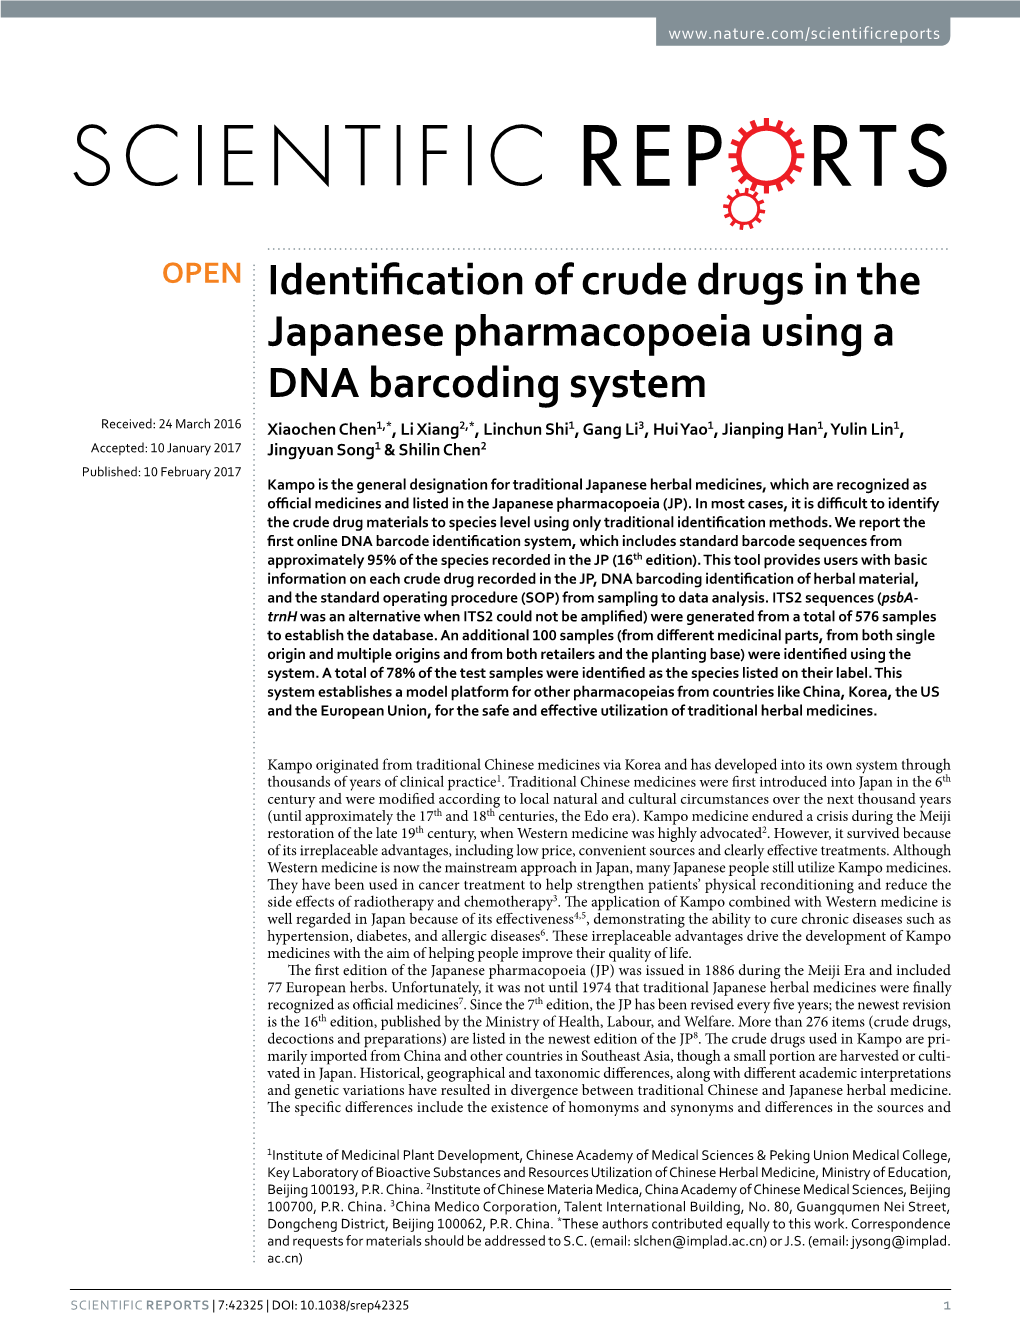 Identification of Crude Drugs in the Japanese Pharmacopoeia Using A